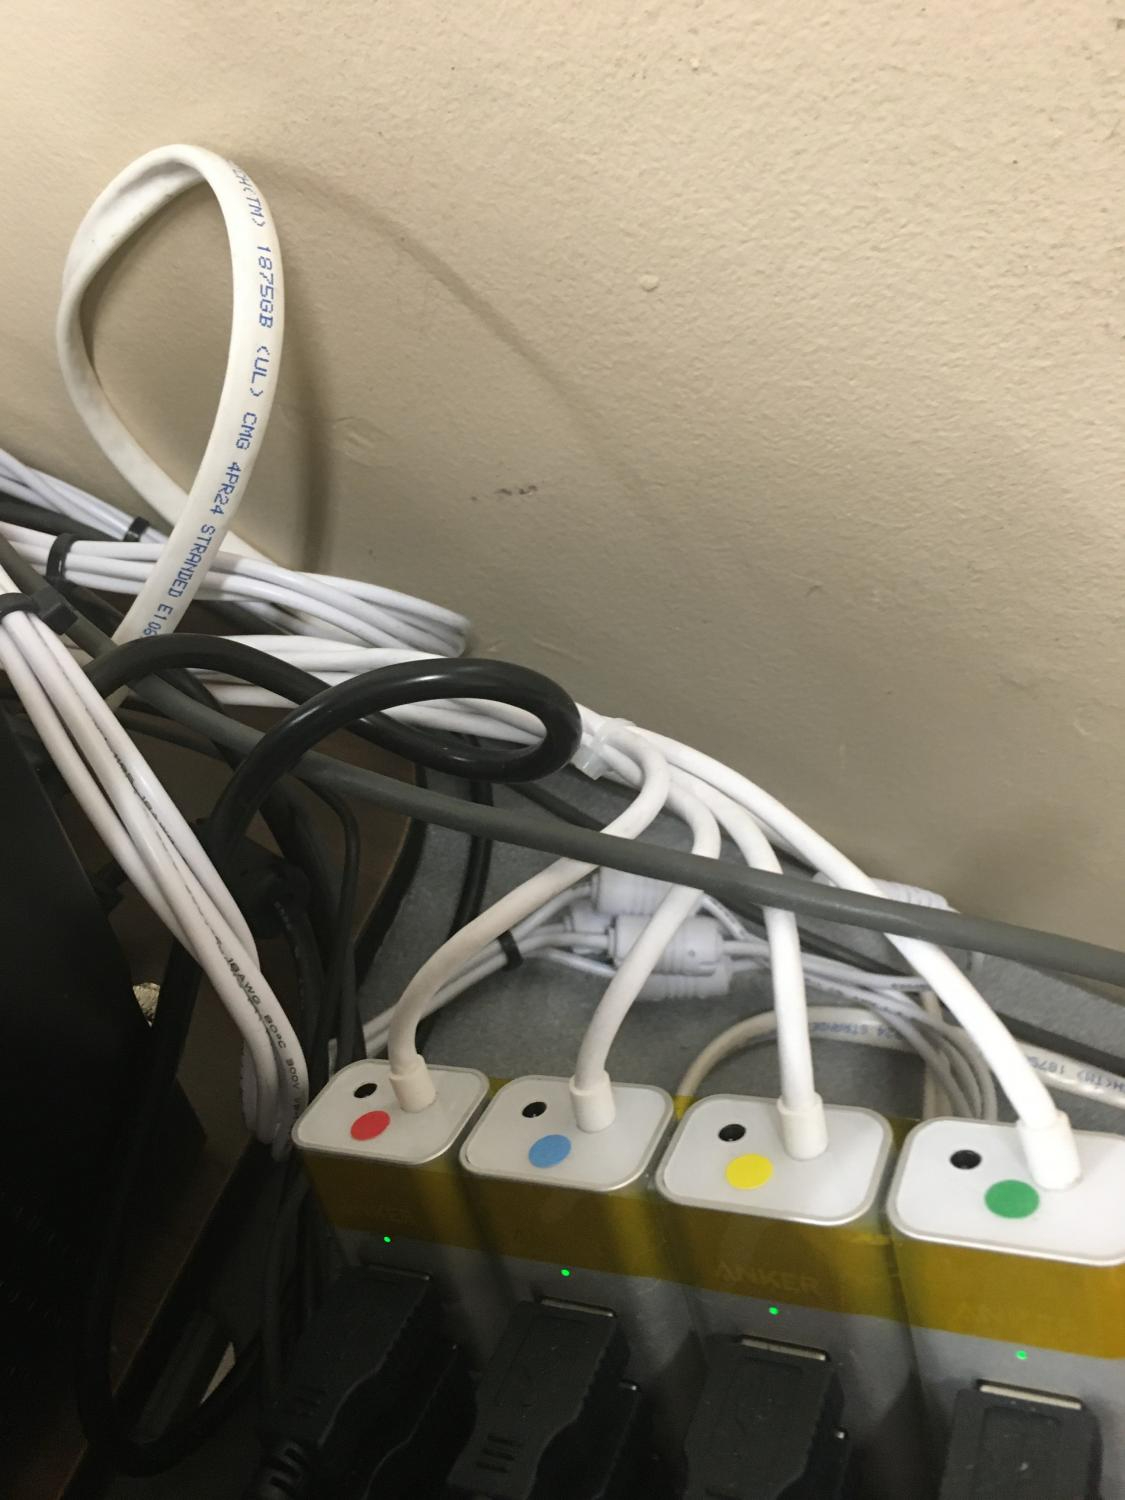 Colored connection dots on the top of the USB Hubs showing where they should be connected to the back of the computer.